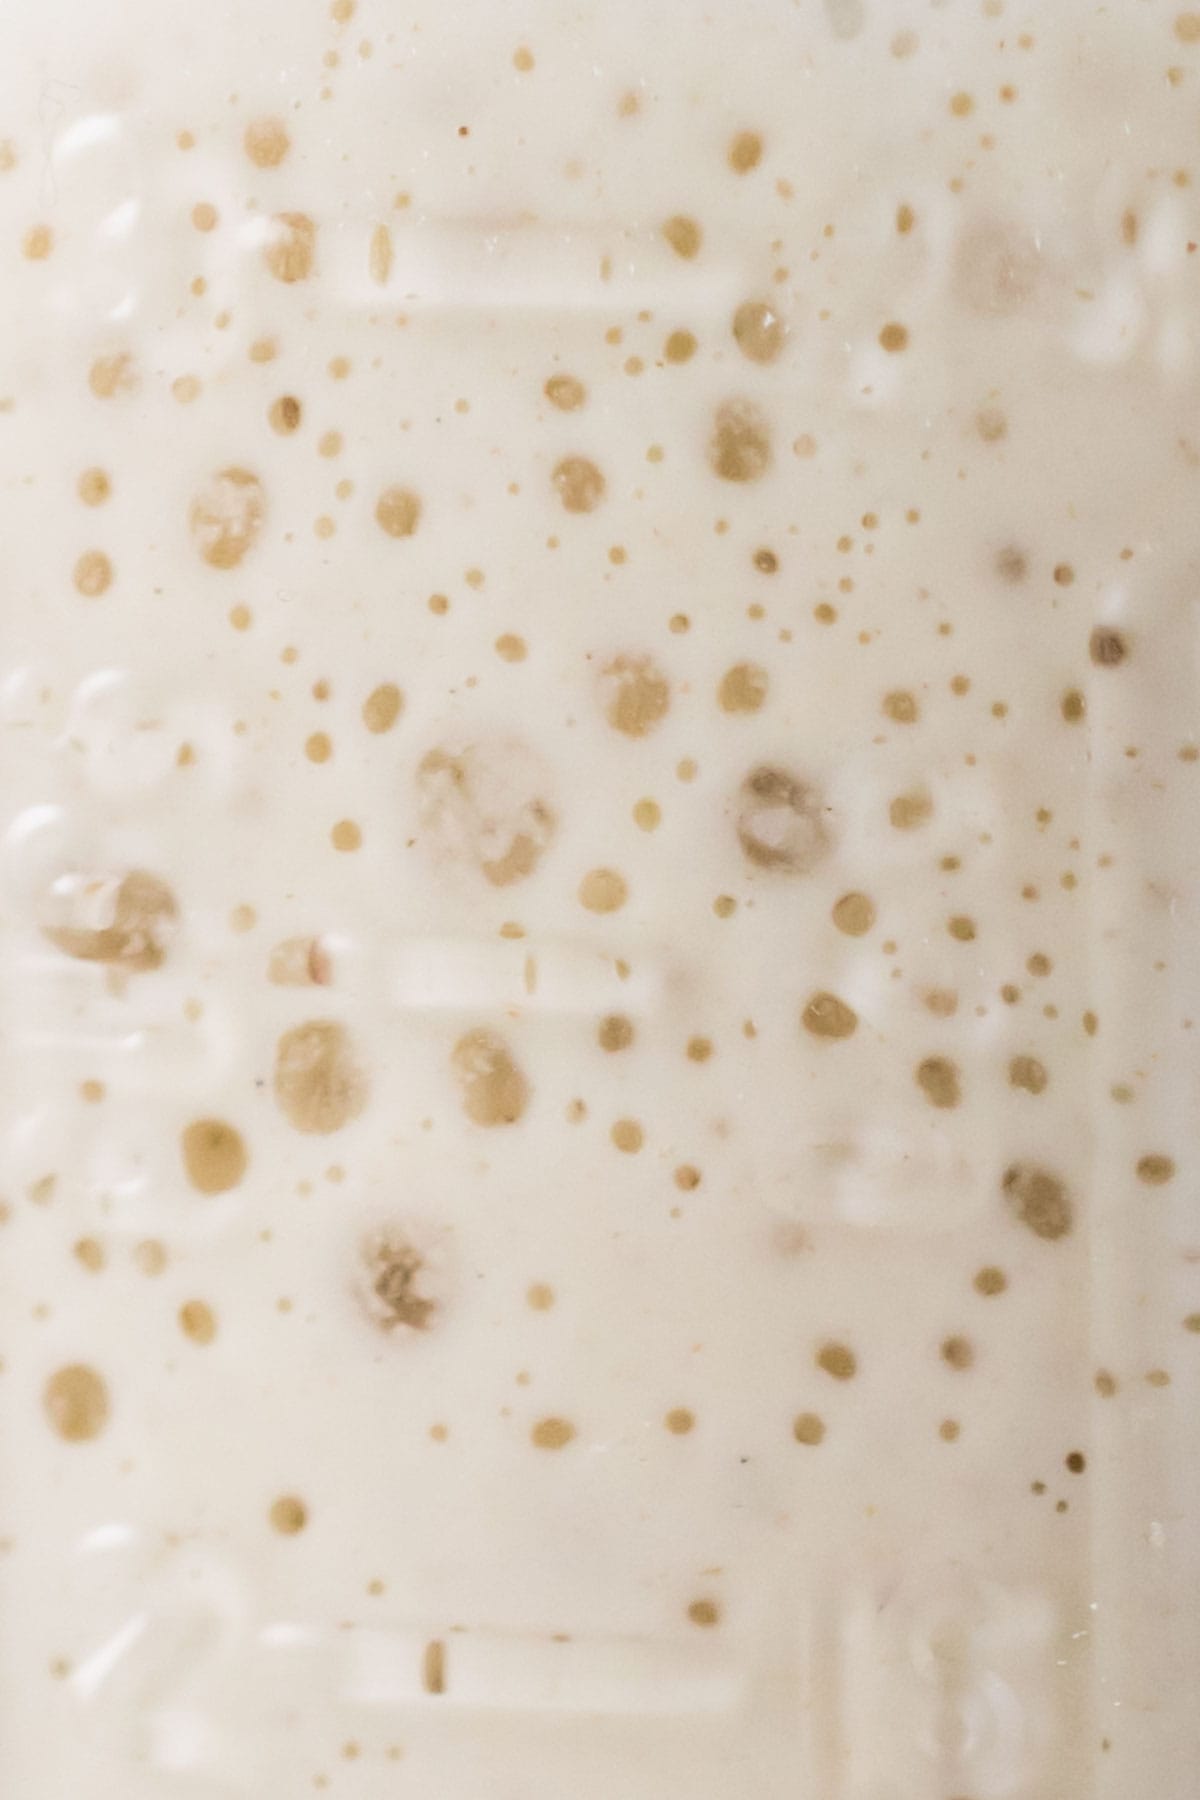 Close-up view of bubbles forming in a sourdough starter.